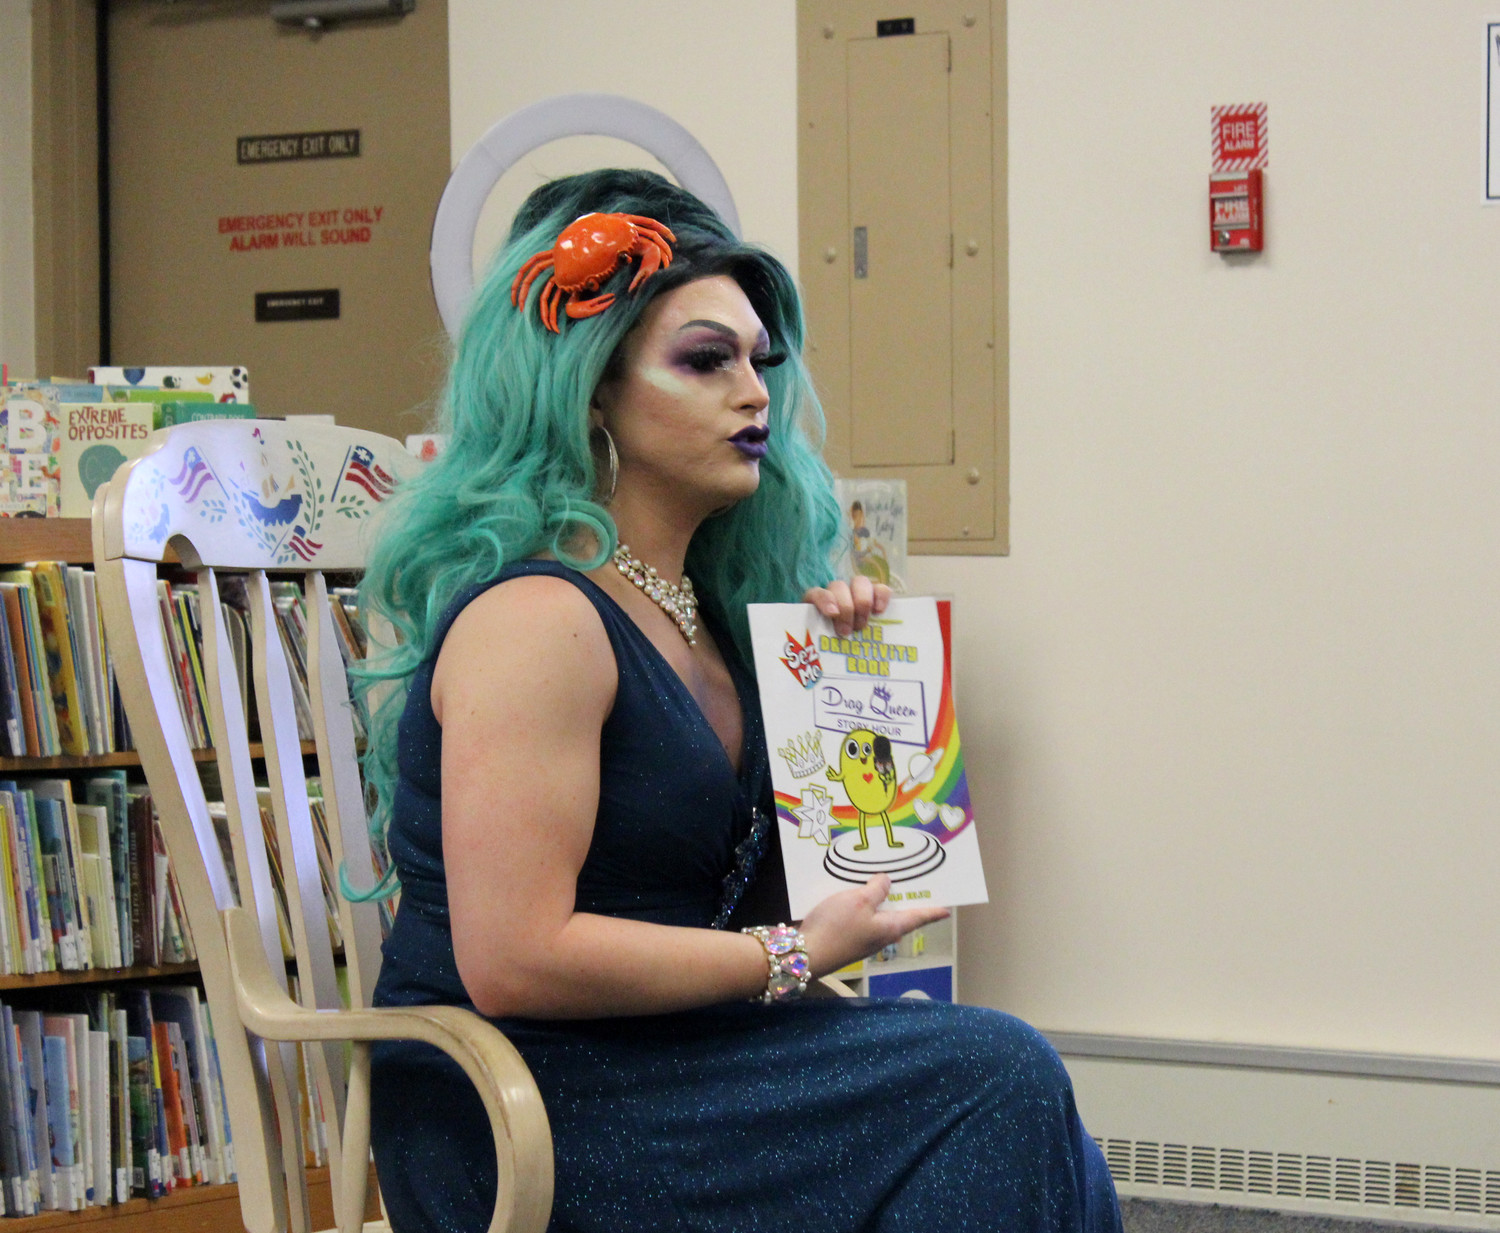 Noche flipped through “The Dragtivity Book,” a coloring book meant to teach children about gender nonconformity, she said.